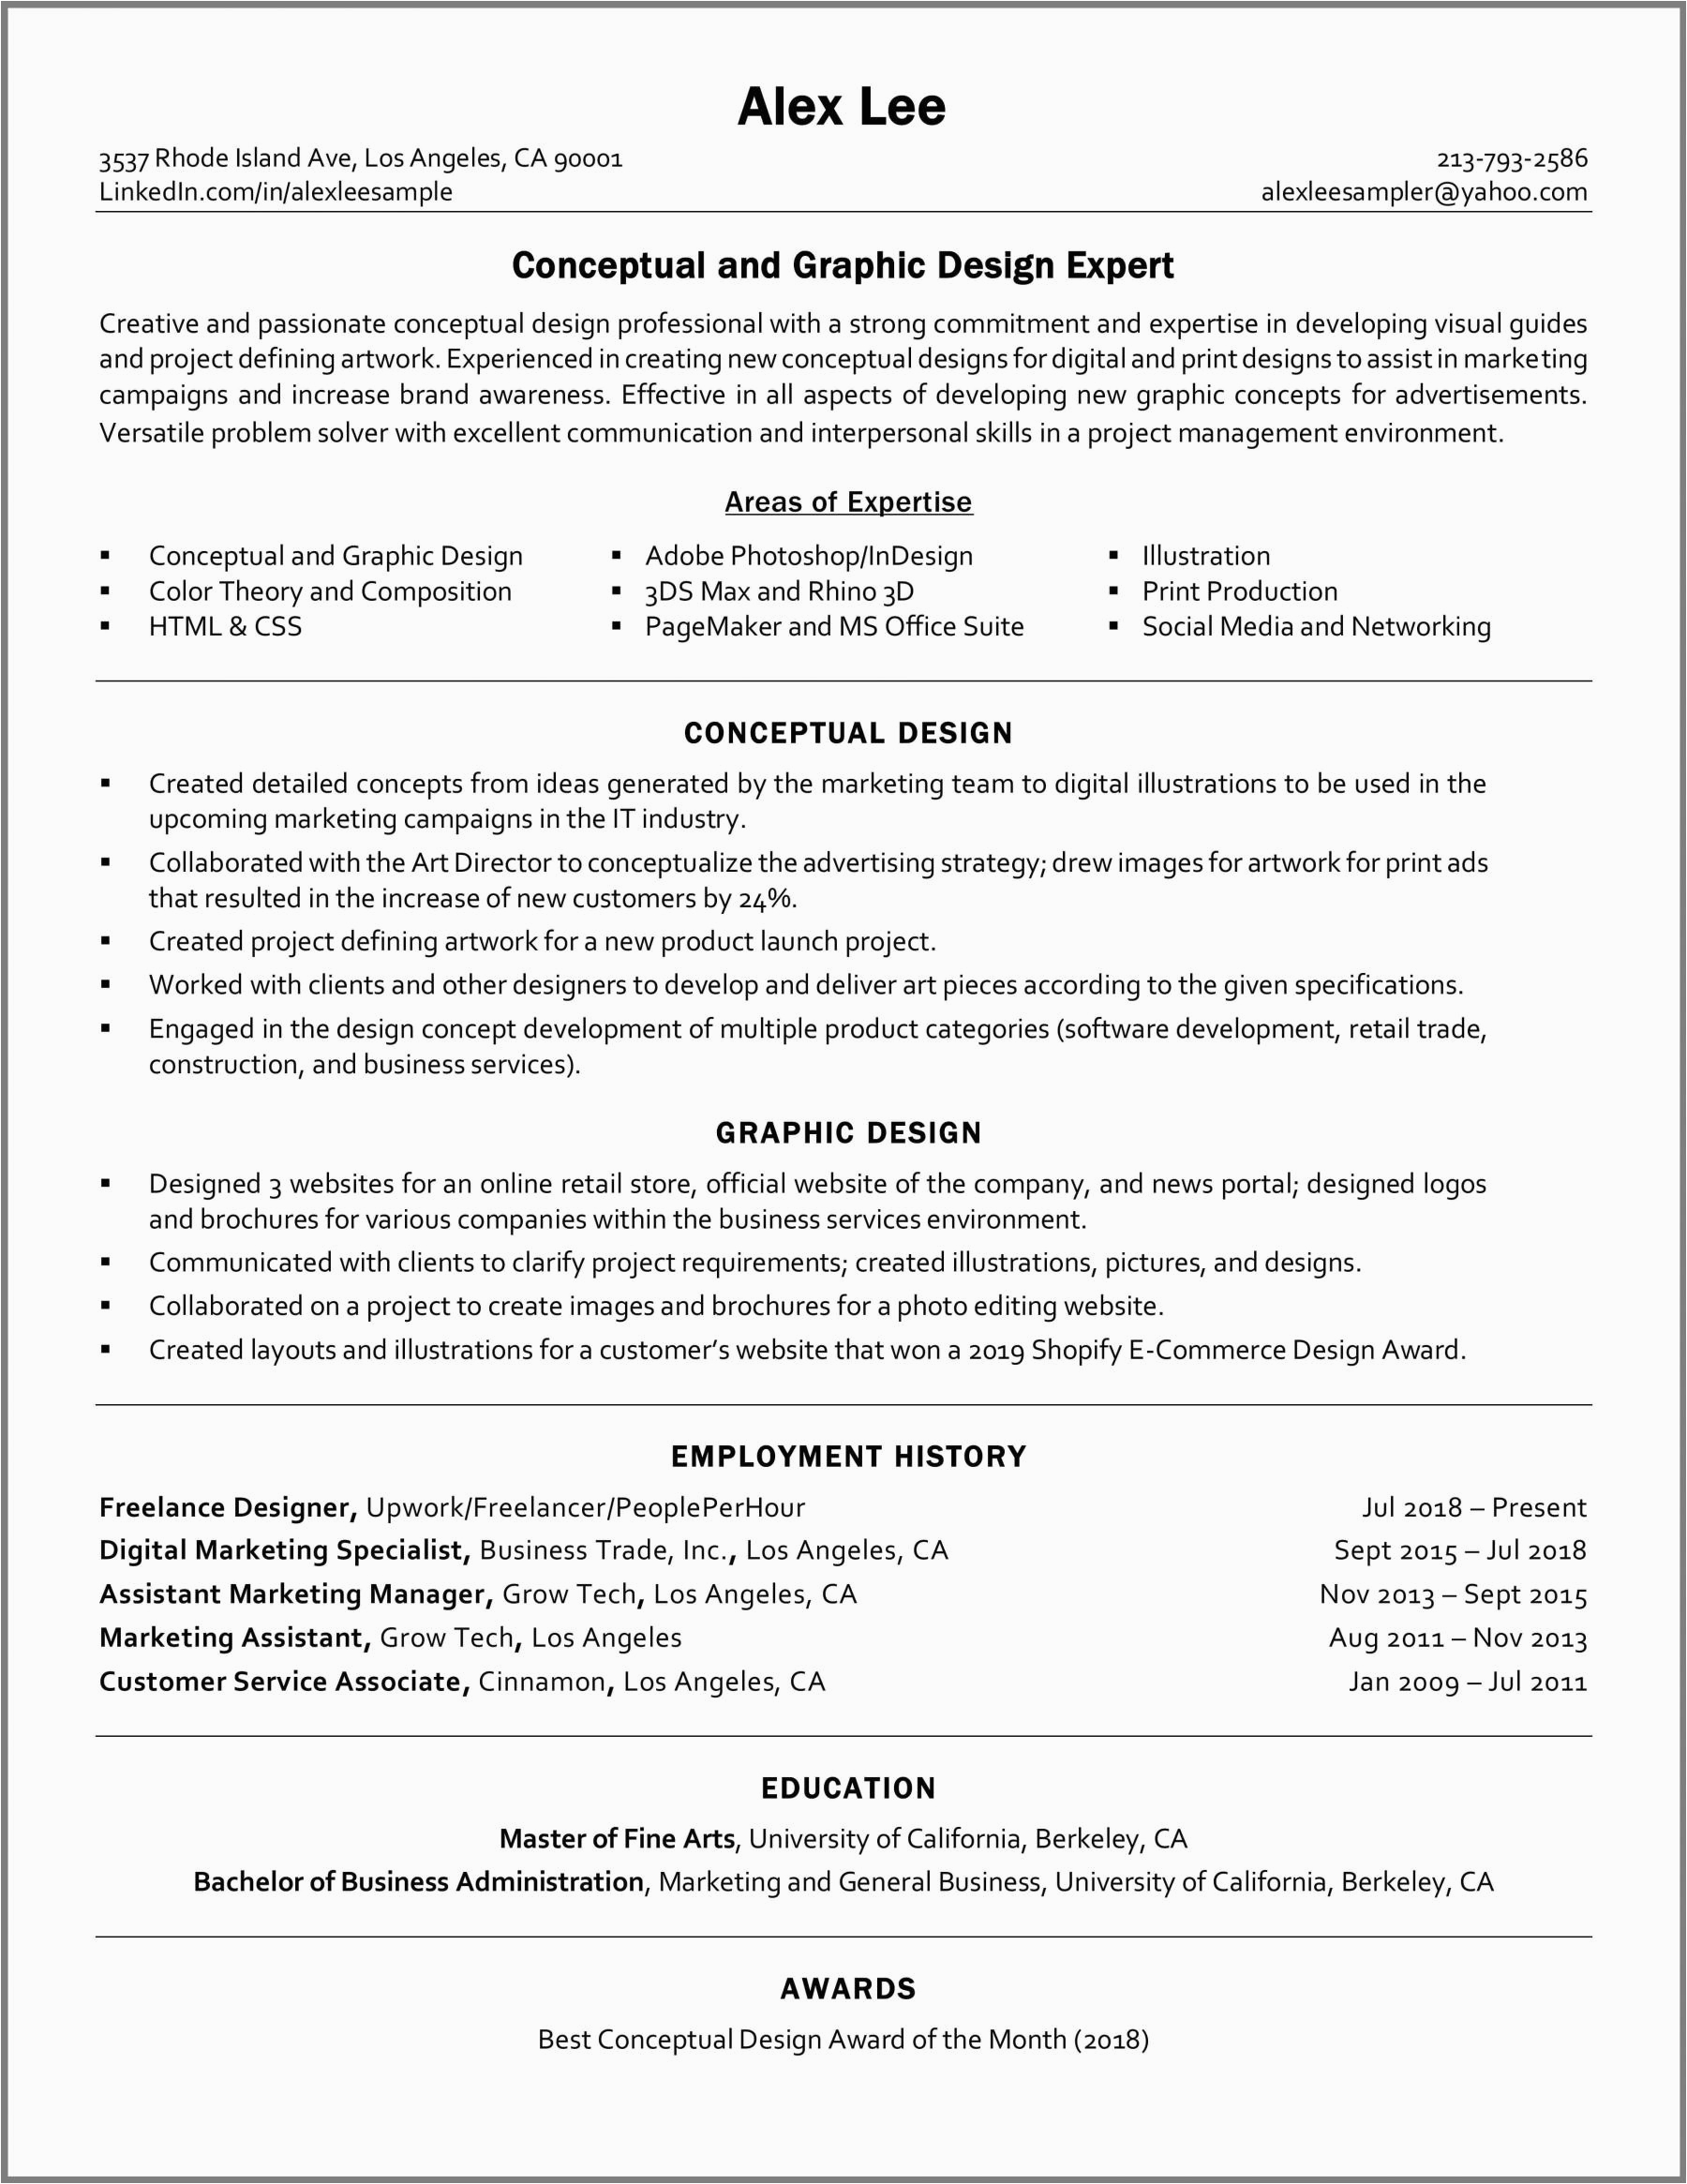 Samples Of Functional Resumes for Career Change Functional Resume Sample for Career Change Good Resume Examples